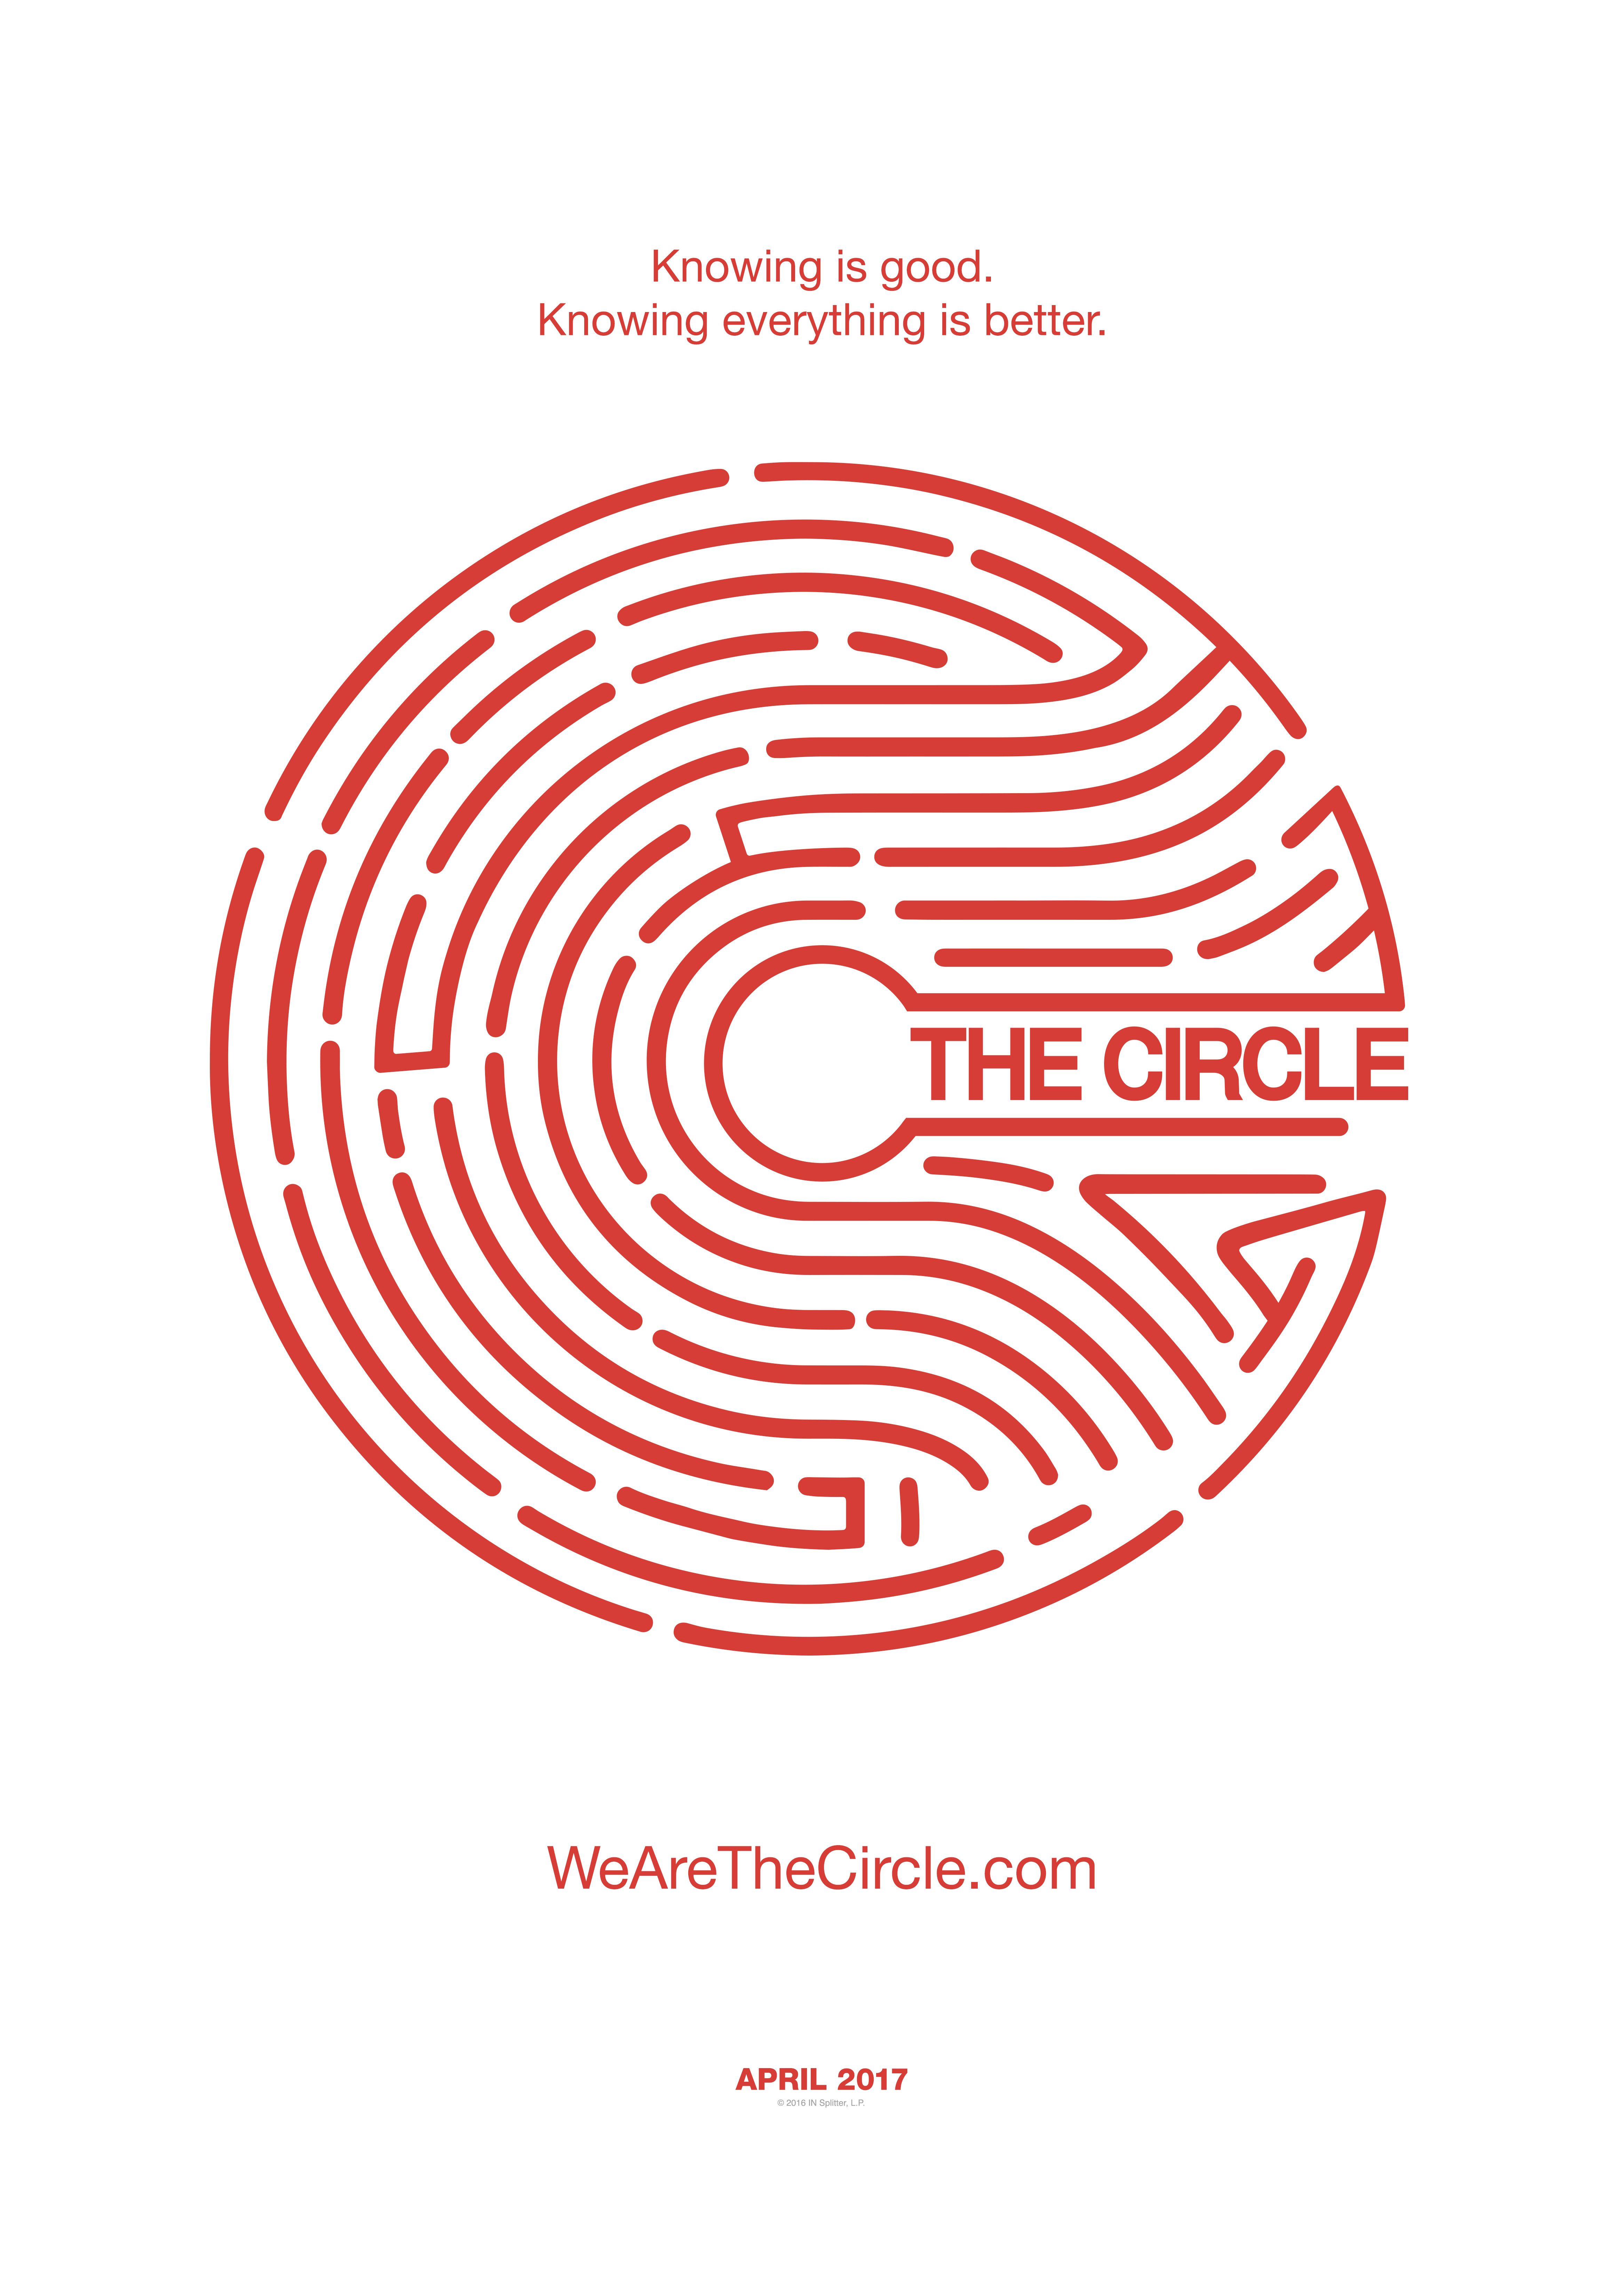 The Circle Poster